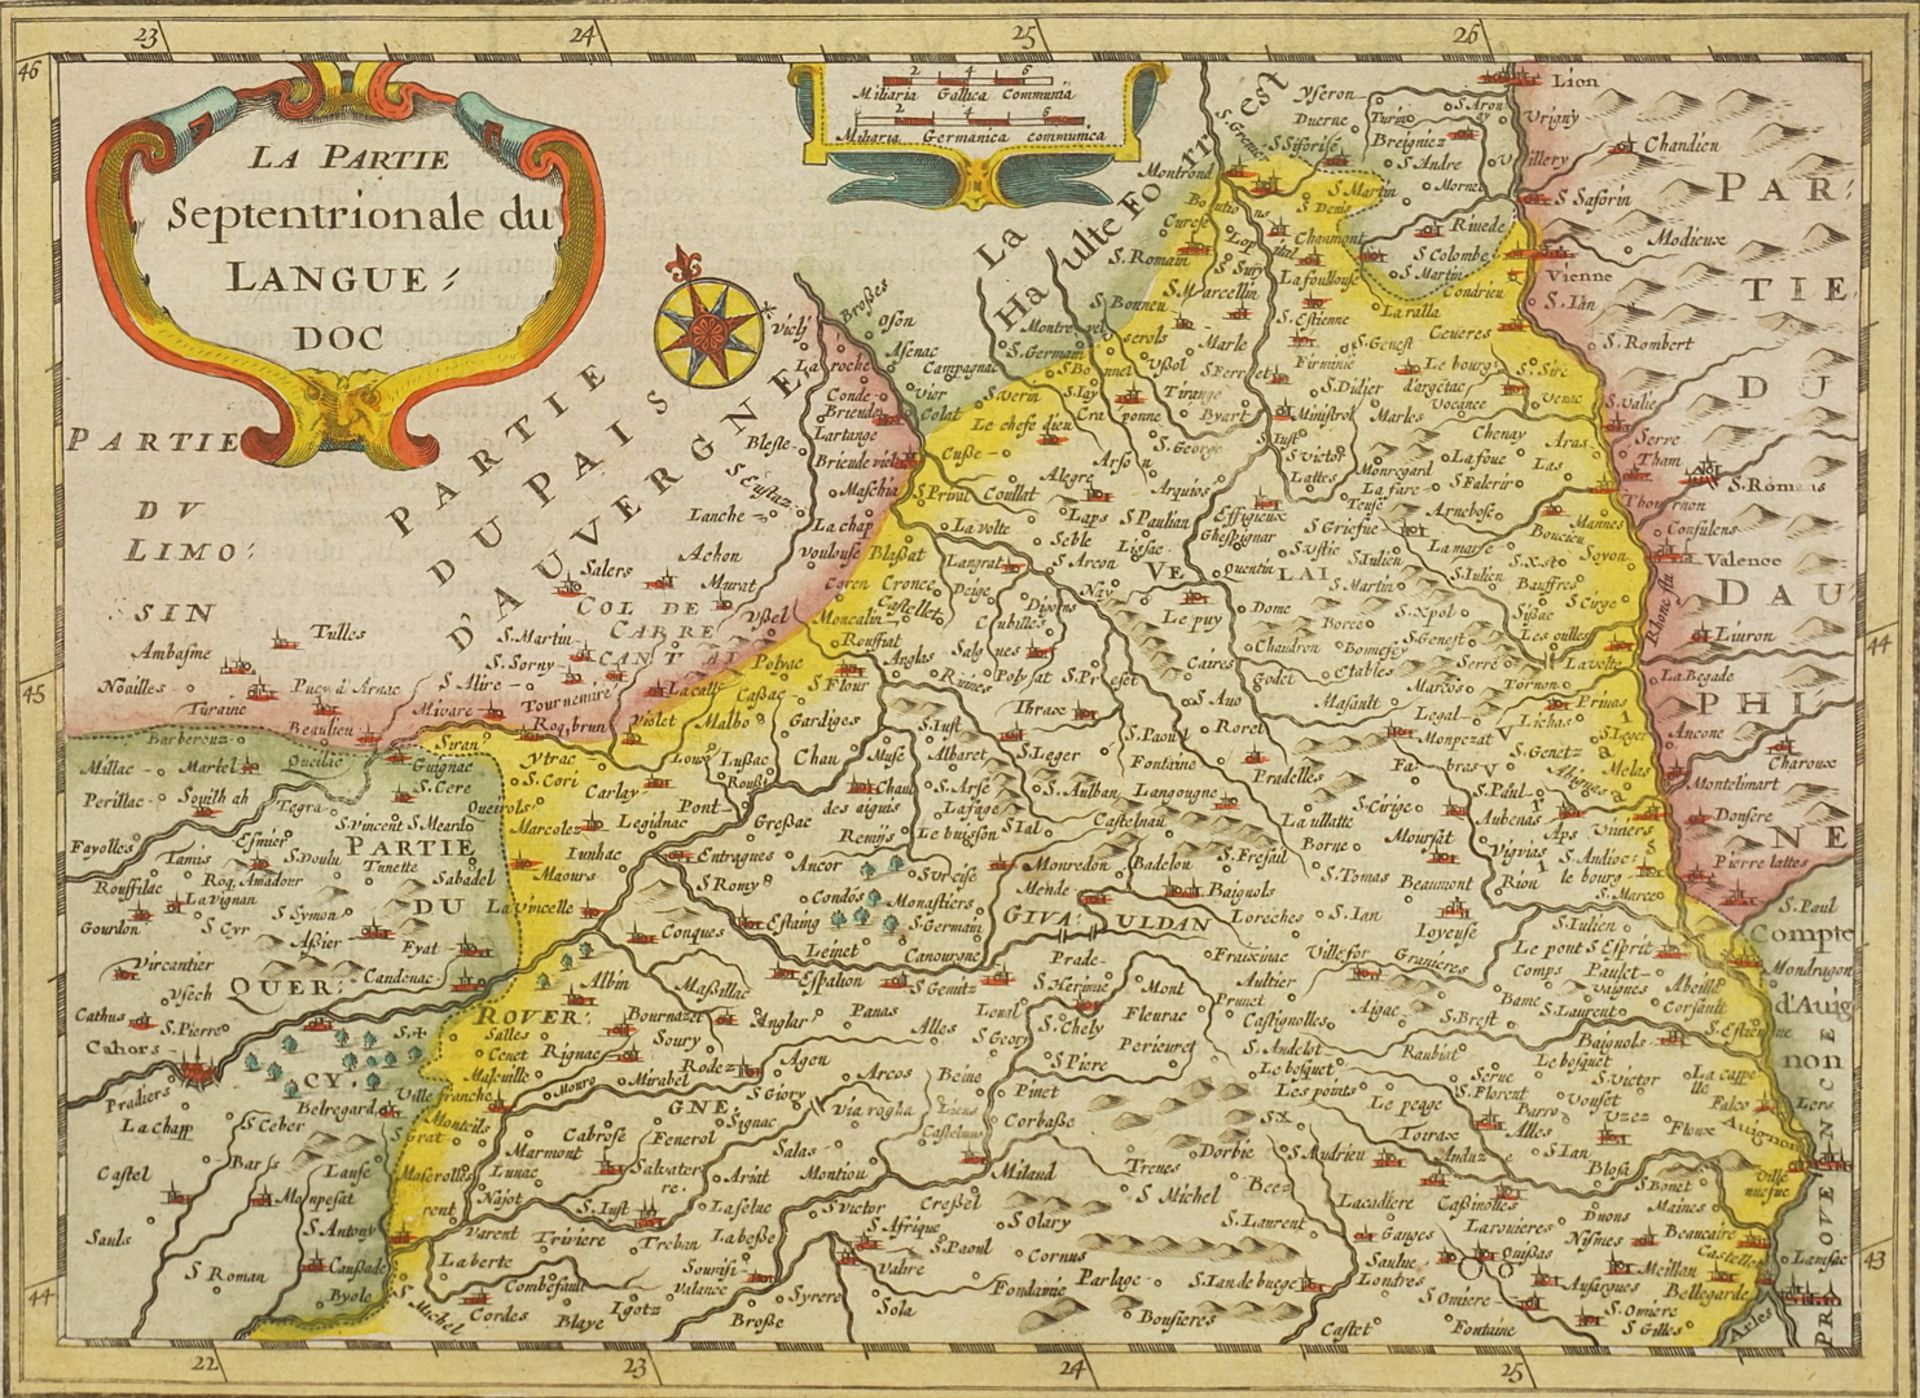 Gerhard Mercator (1512-1594), Map of the Northern Languedoc